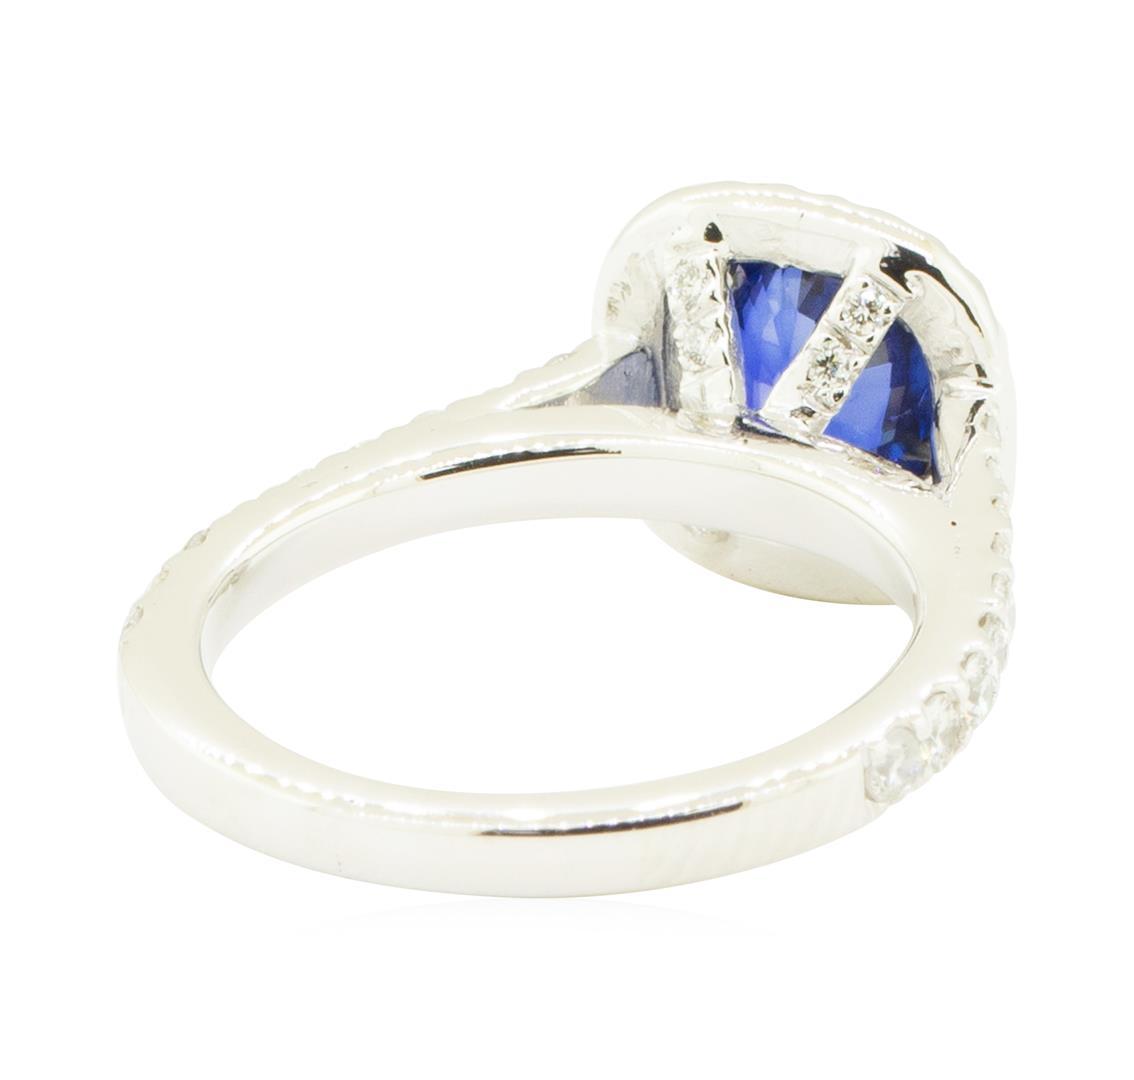 1.94 ctw Oval Brilliant Blue Sapphire And Diamond Ring - 14KT White Gold